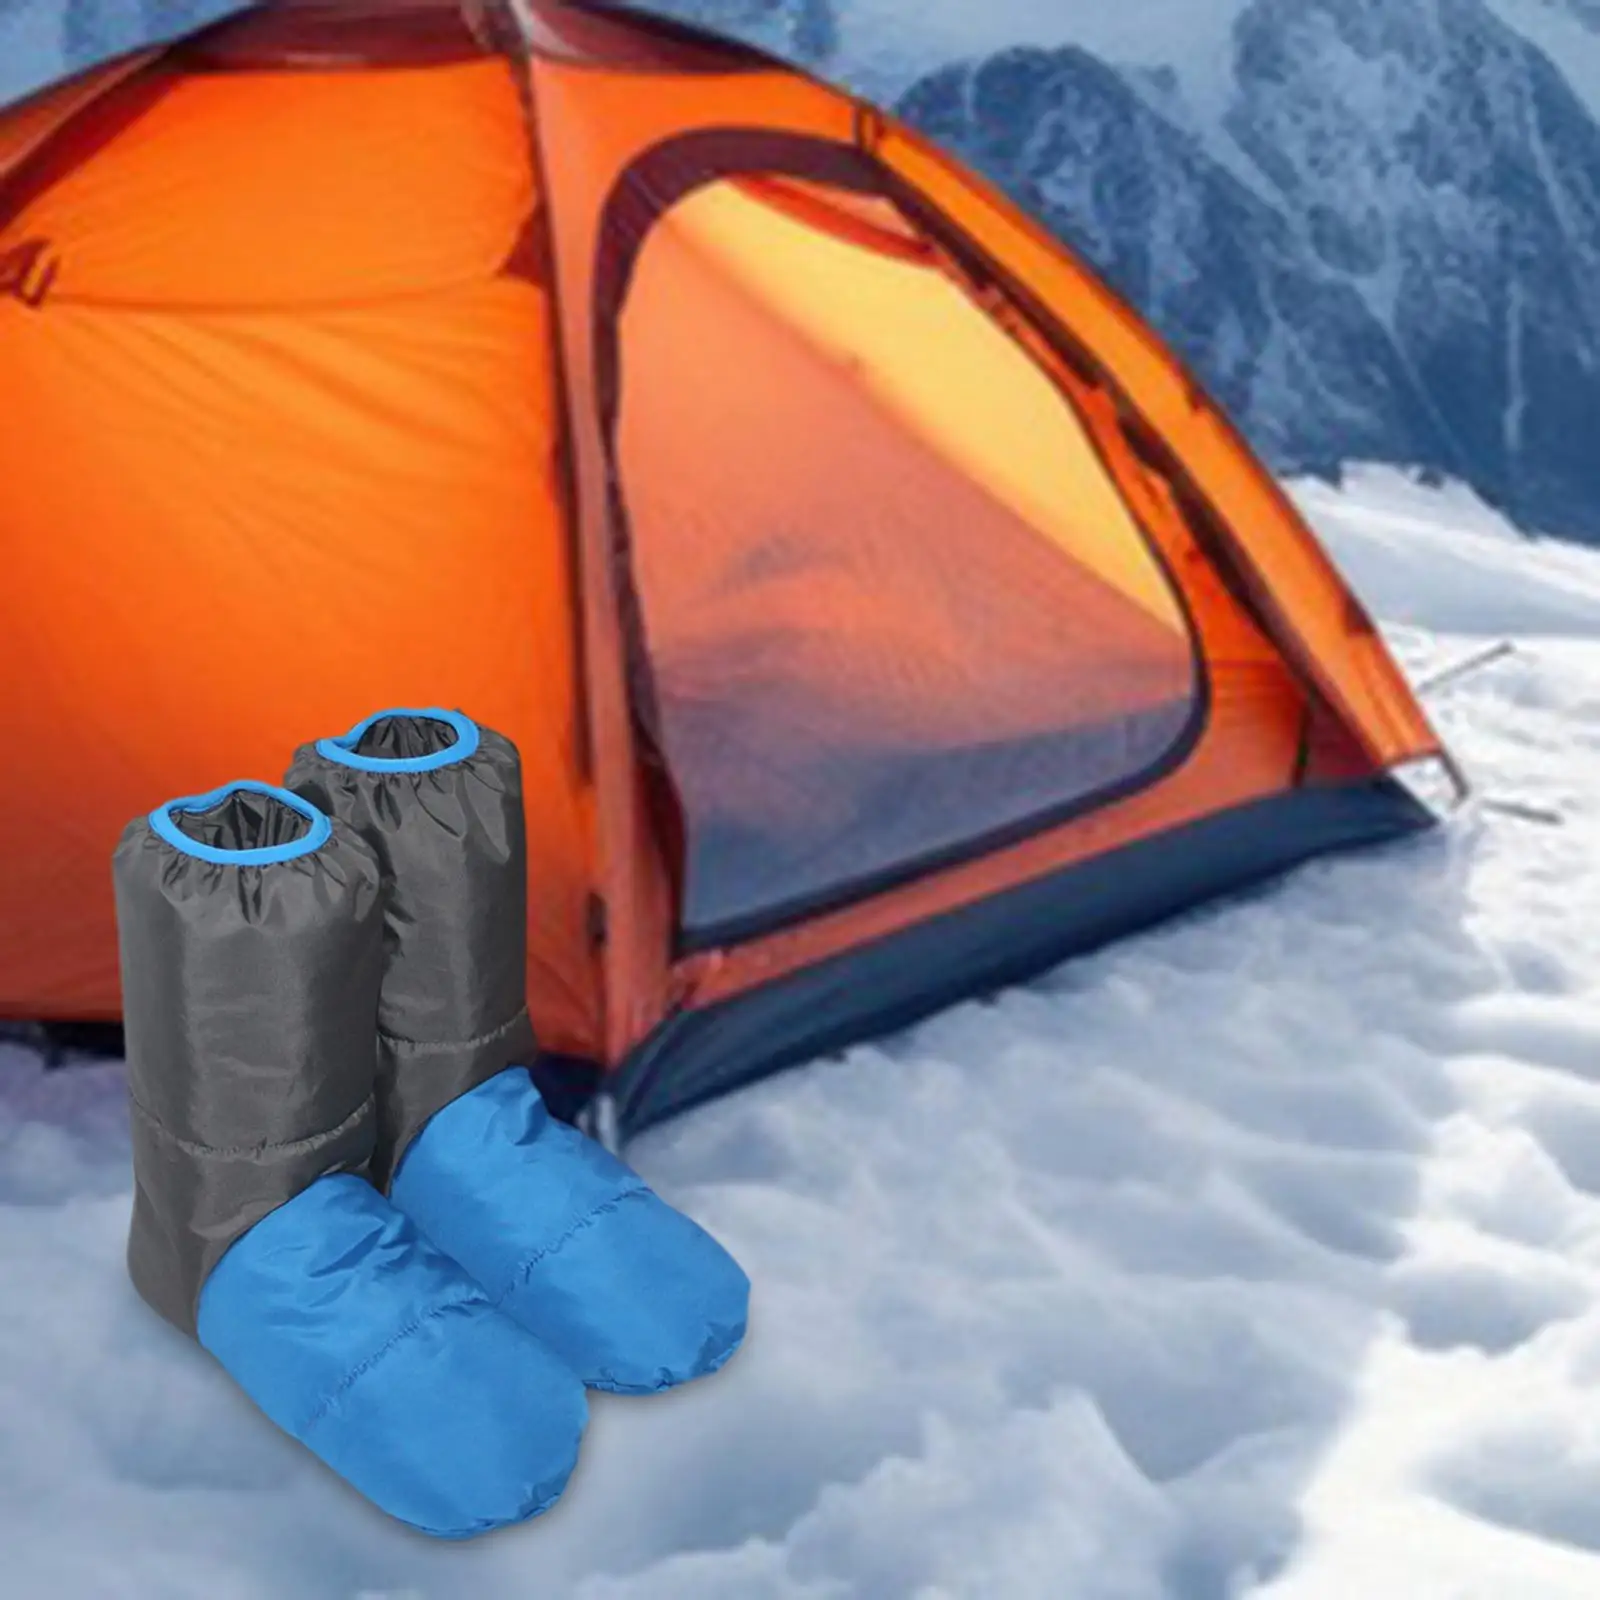 Down Booties Down Shoes Breathable Snow Boots Foot Socks Down Slippers for Camping Climbing Shoes Bed Men Women